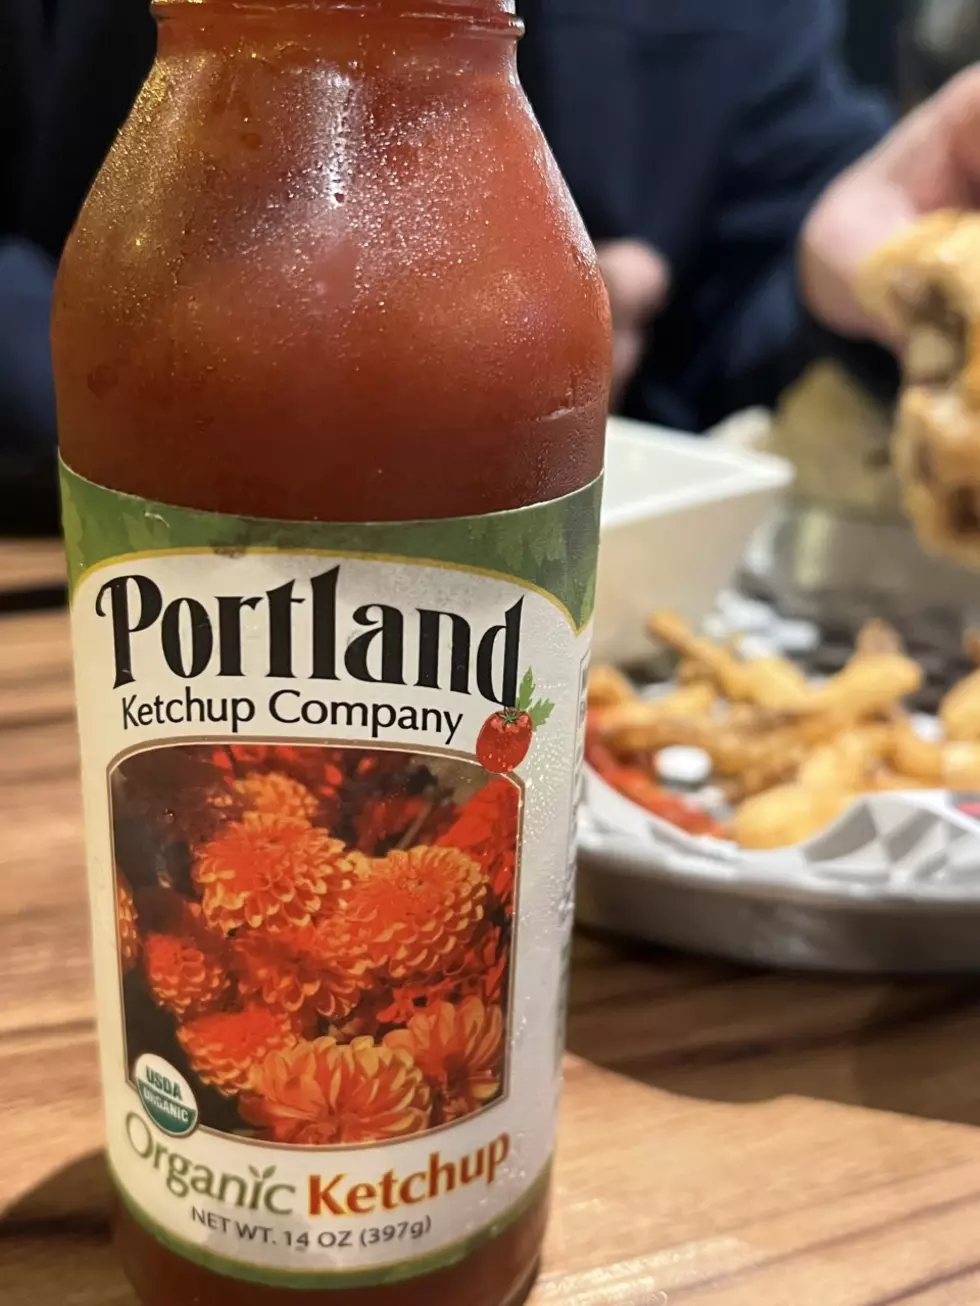 Say What? Have You Ever Experienced Portland's Popular Ketchup?